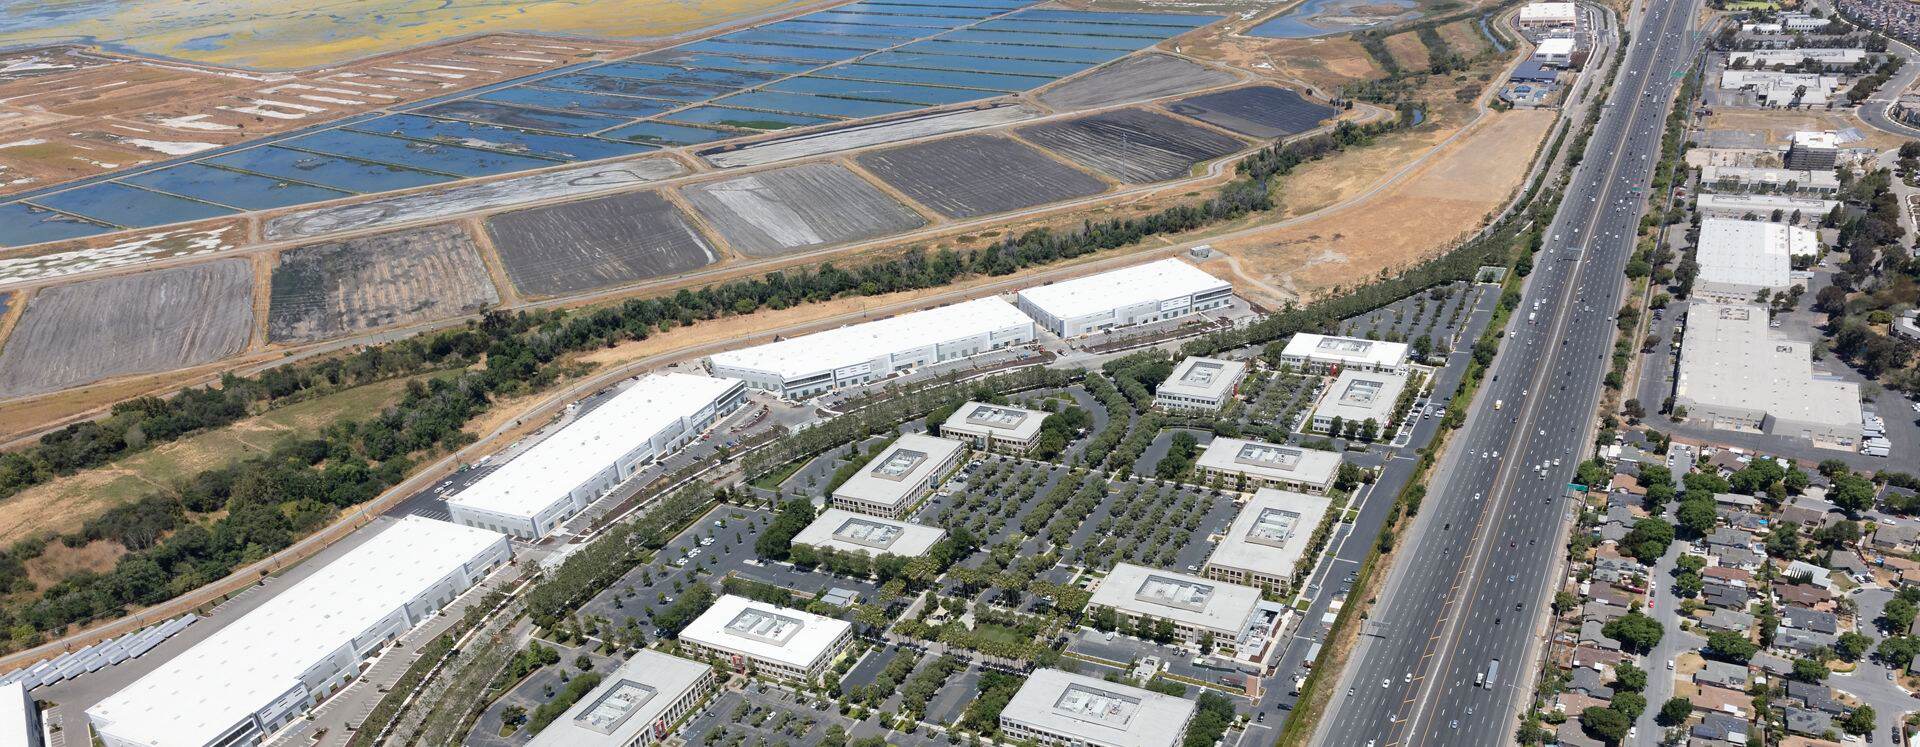 Aerial photography of McCarthy Center in Milpitas in Silicon Valley, Ca